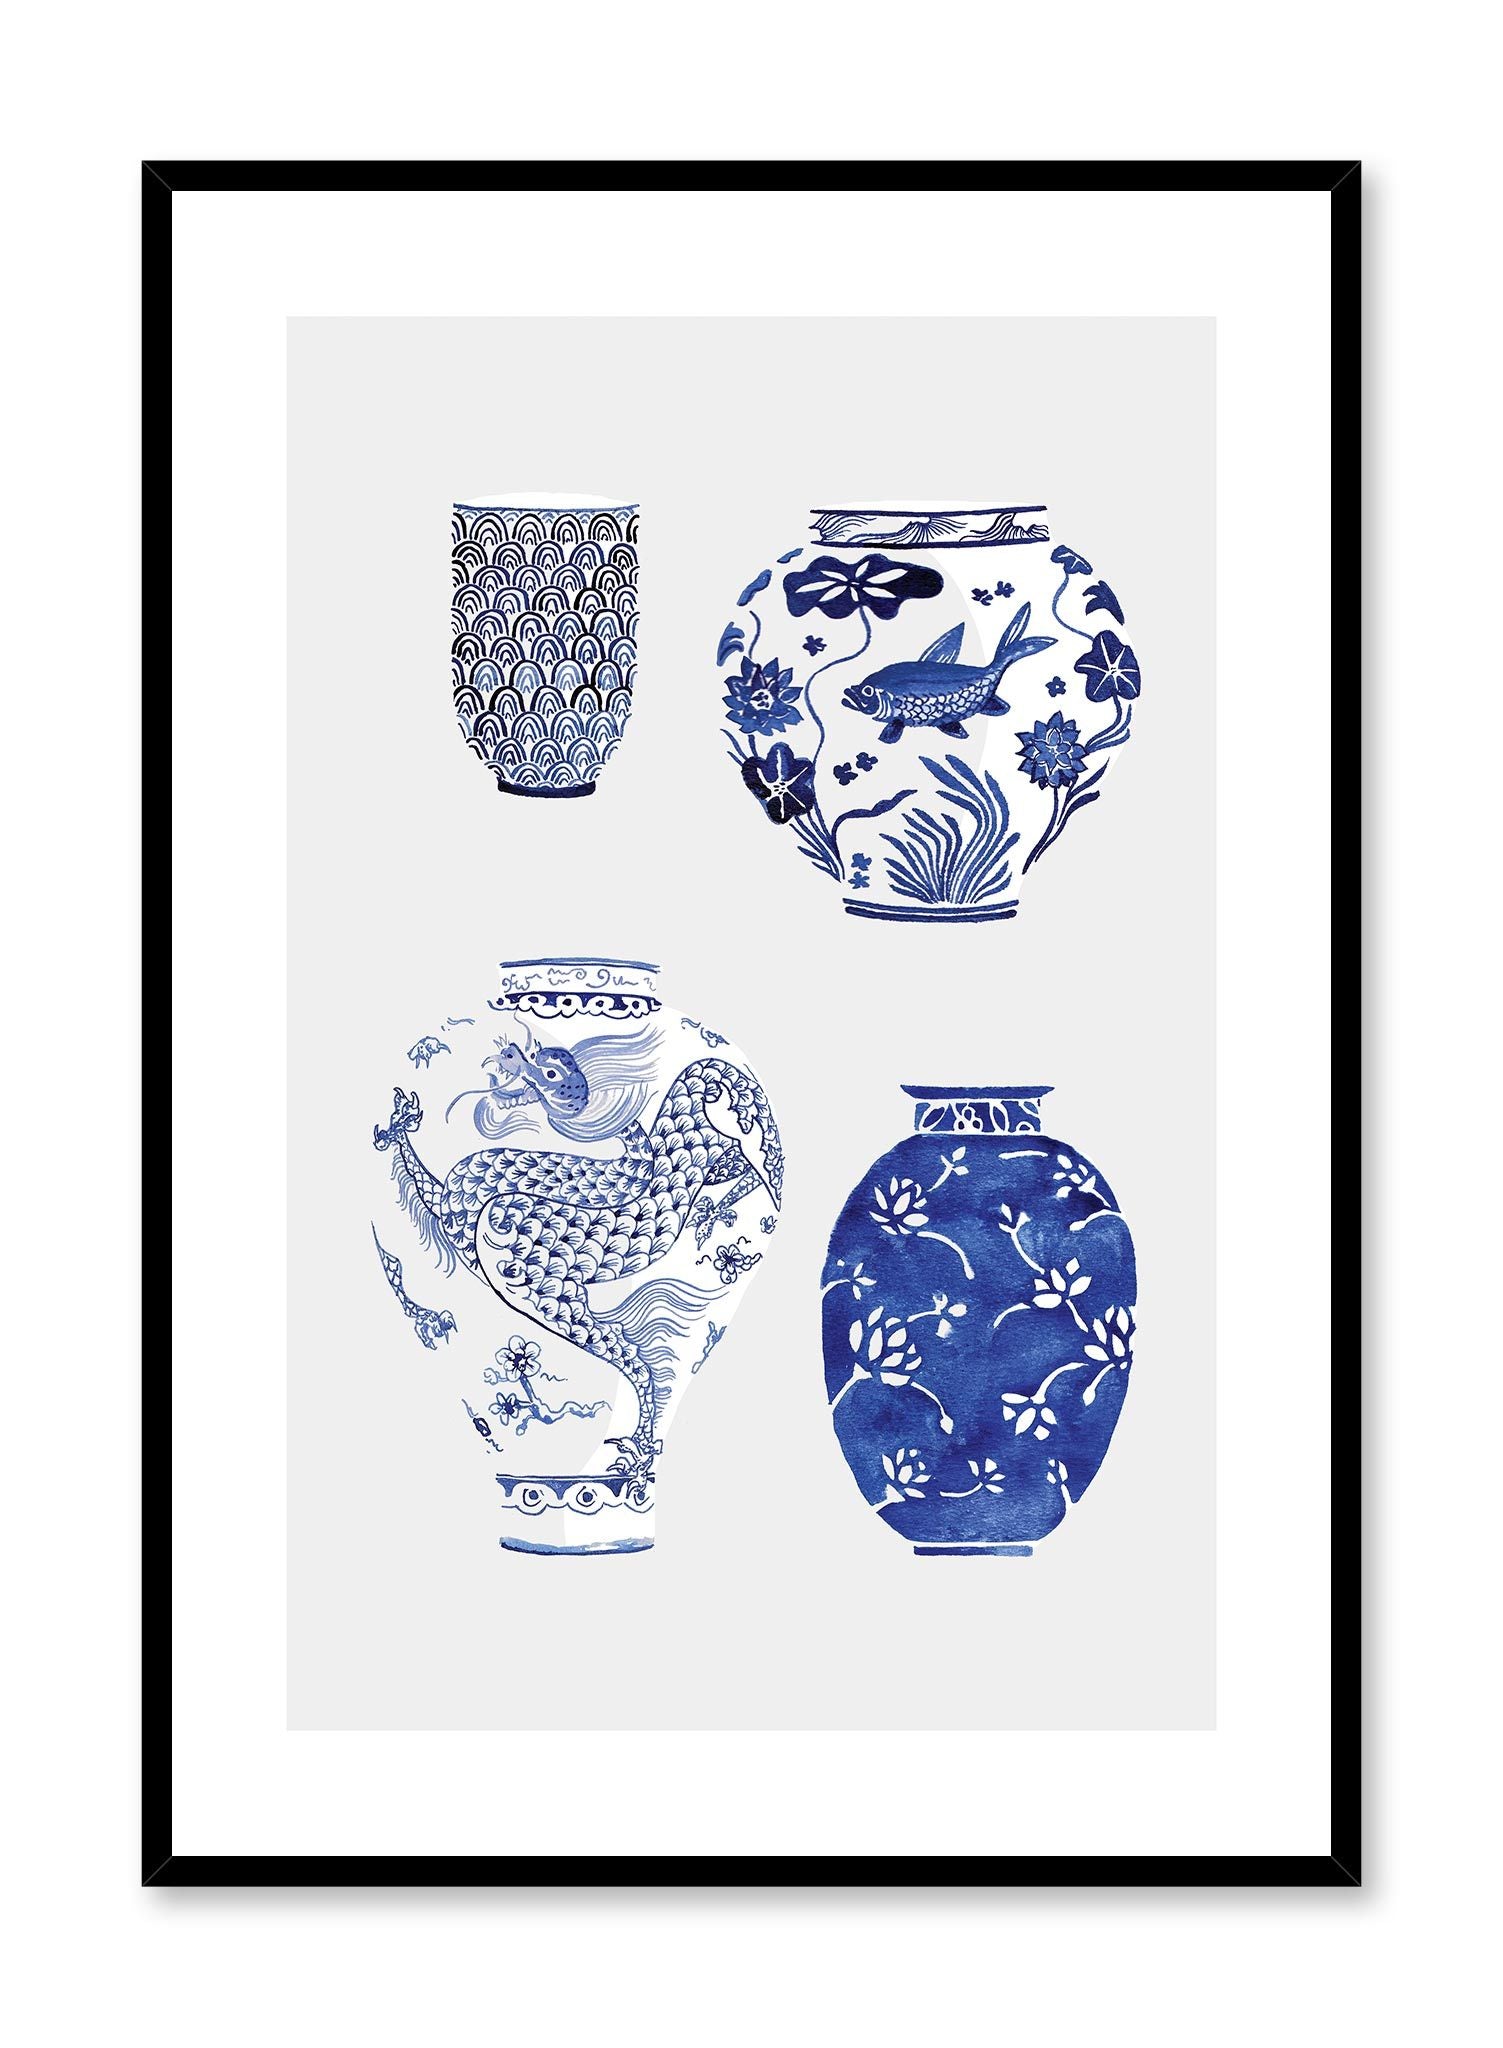 Tojiki is a minimalist illustration by Opposite Wall of four big blue vases with different patterns.